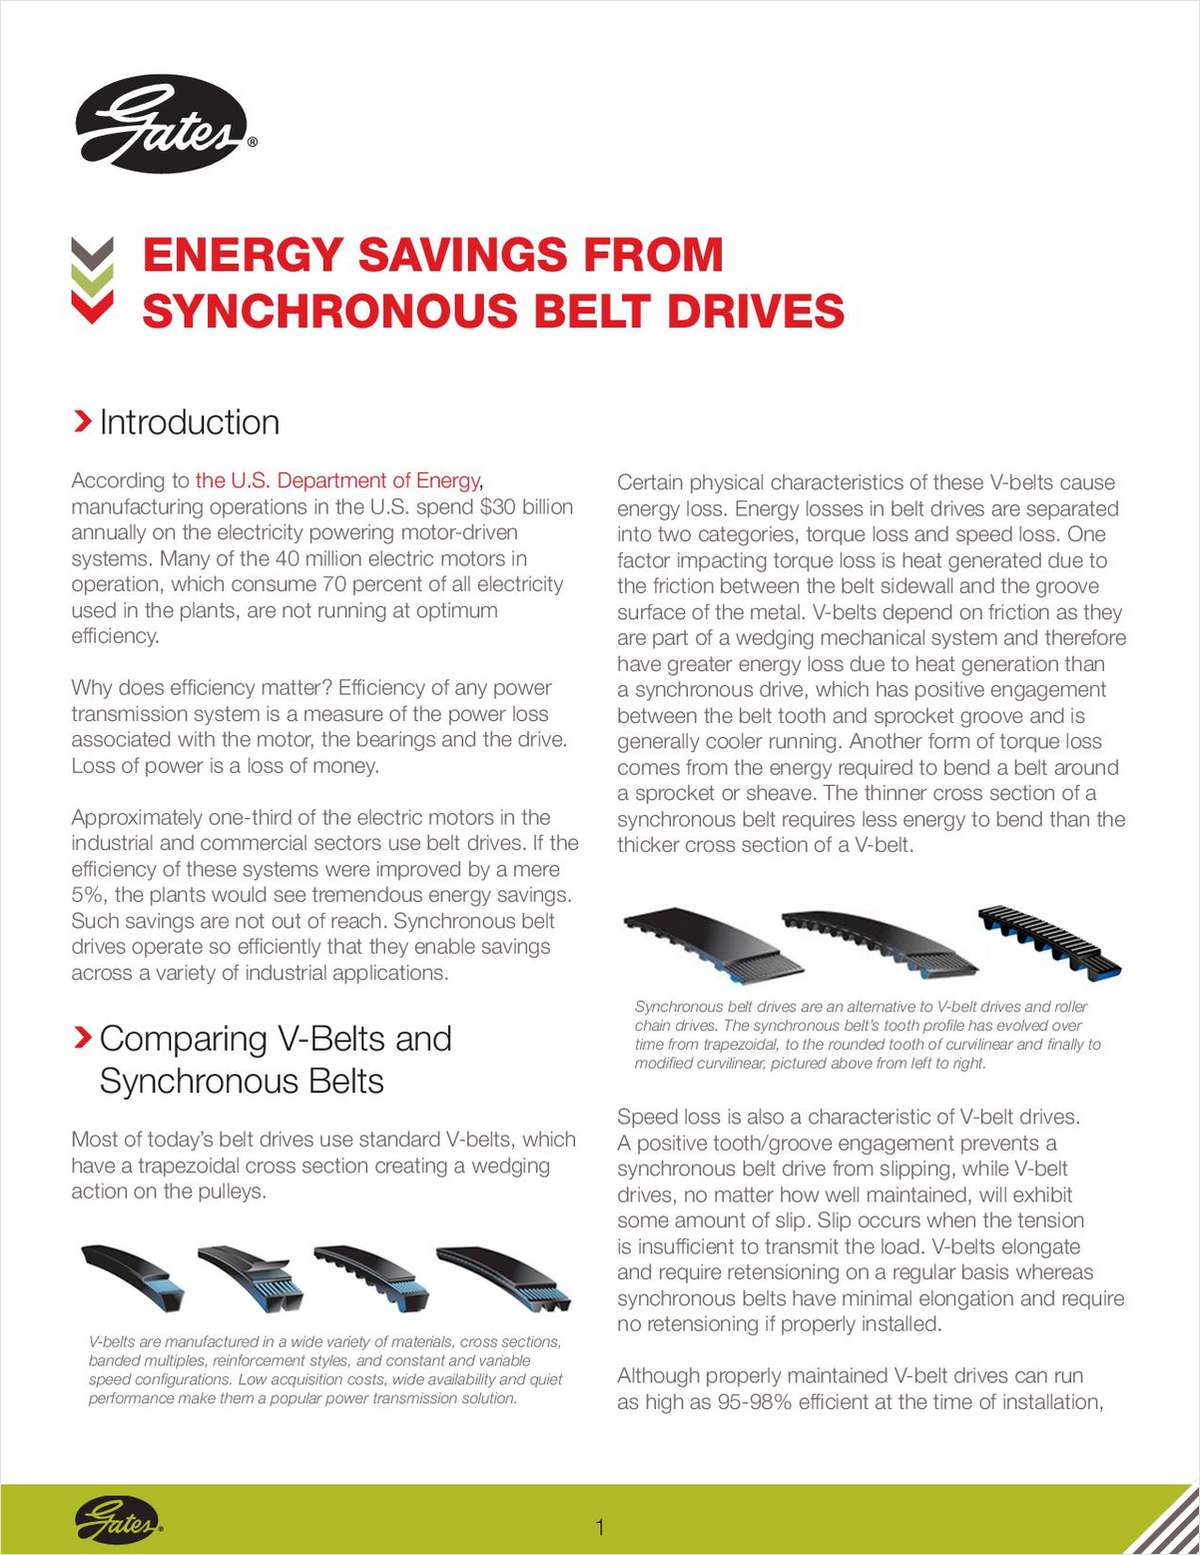 Energy Savings from Synchronous Belt Drives